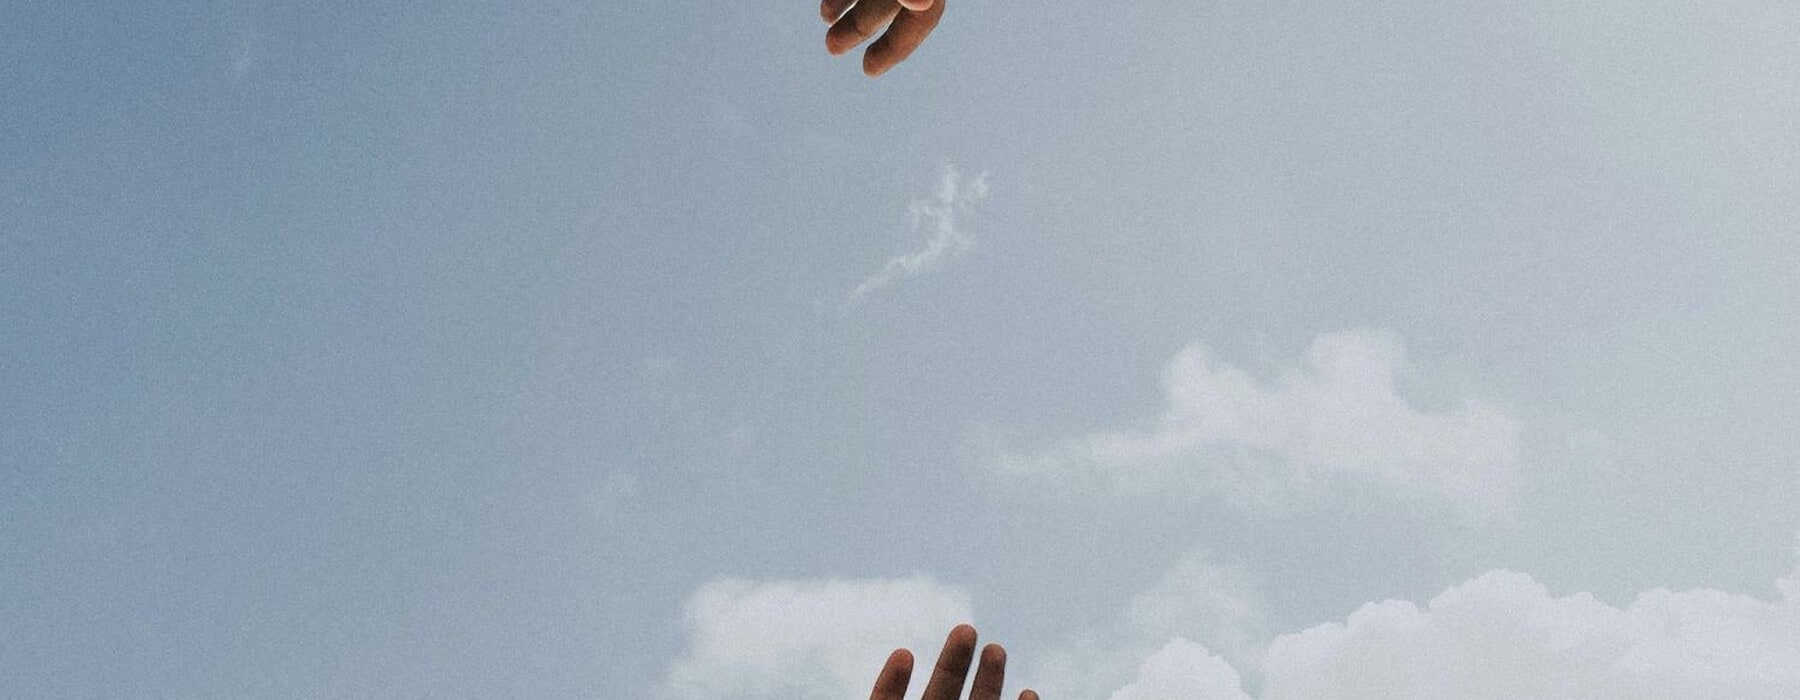 Hands reaching for each other